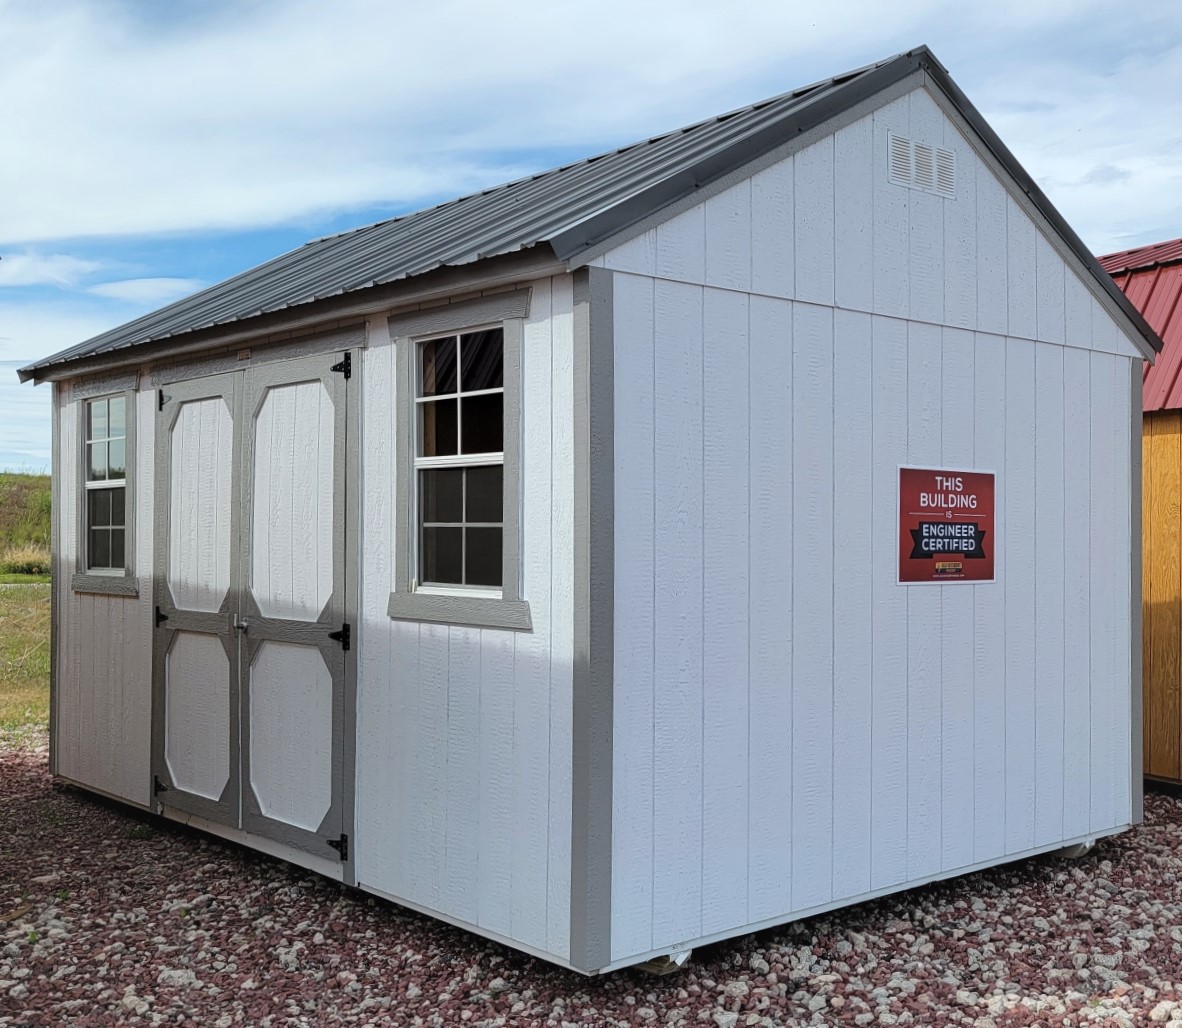 10x16 Painted Utility Shed | Casper's Shed For Sale